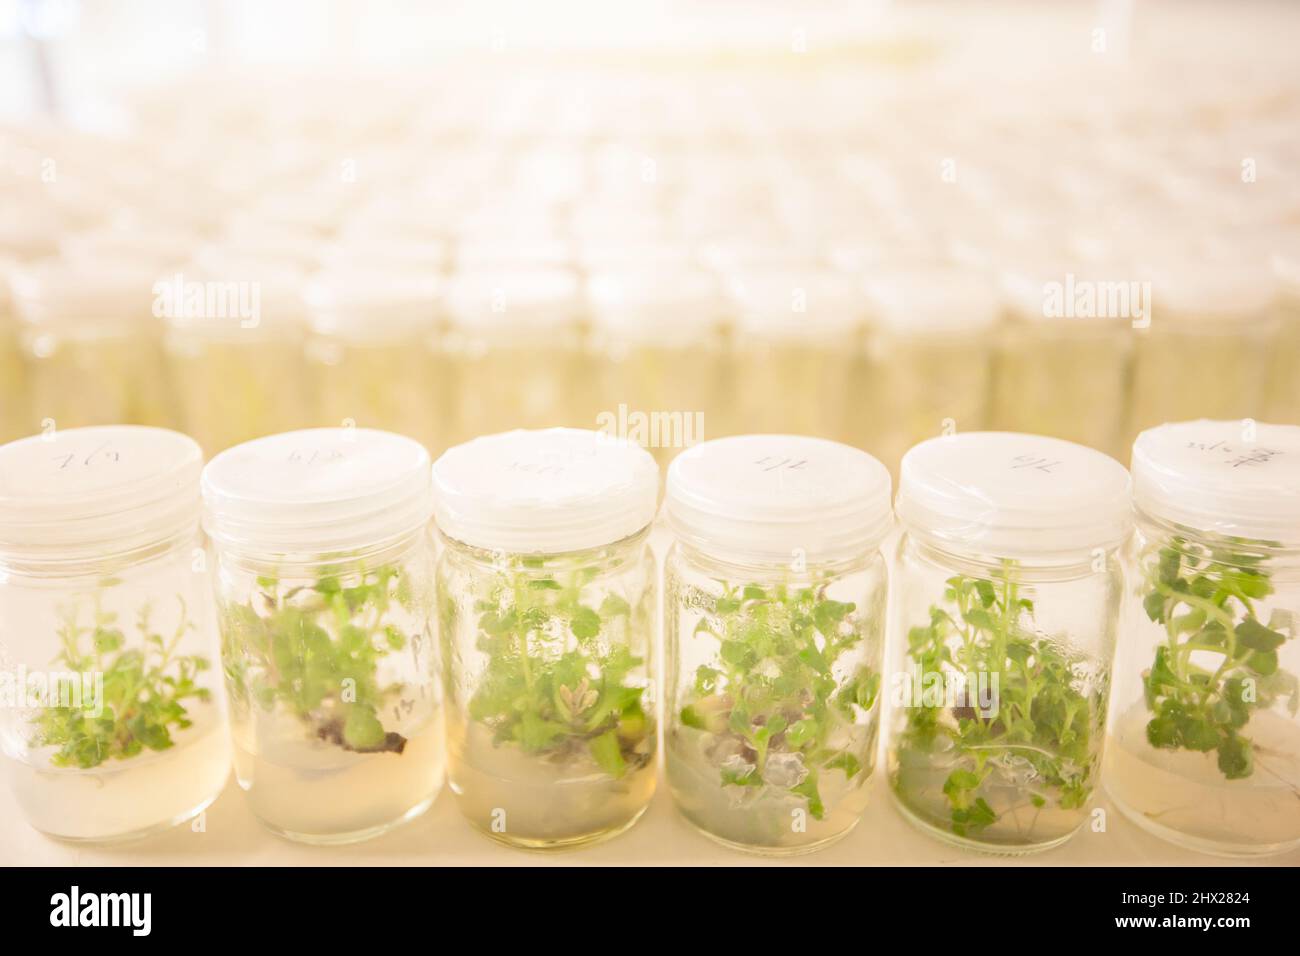 Plant tissue culture, a small plant in test tubes. Asparagus and other tropical plants in a laboratory. Stock Photo